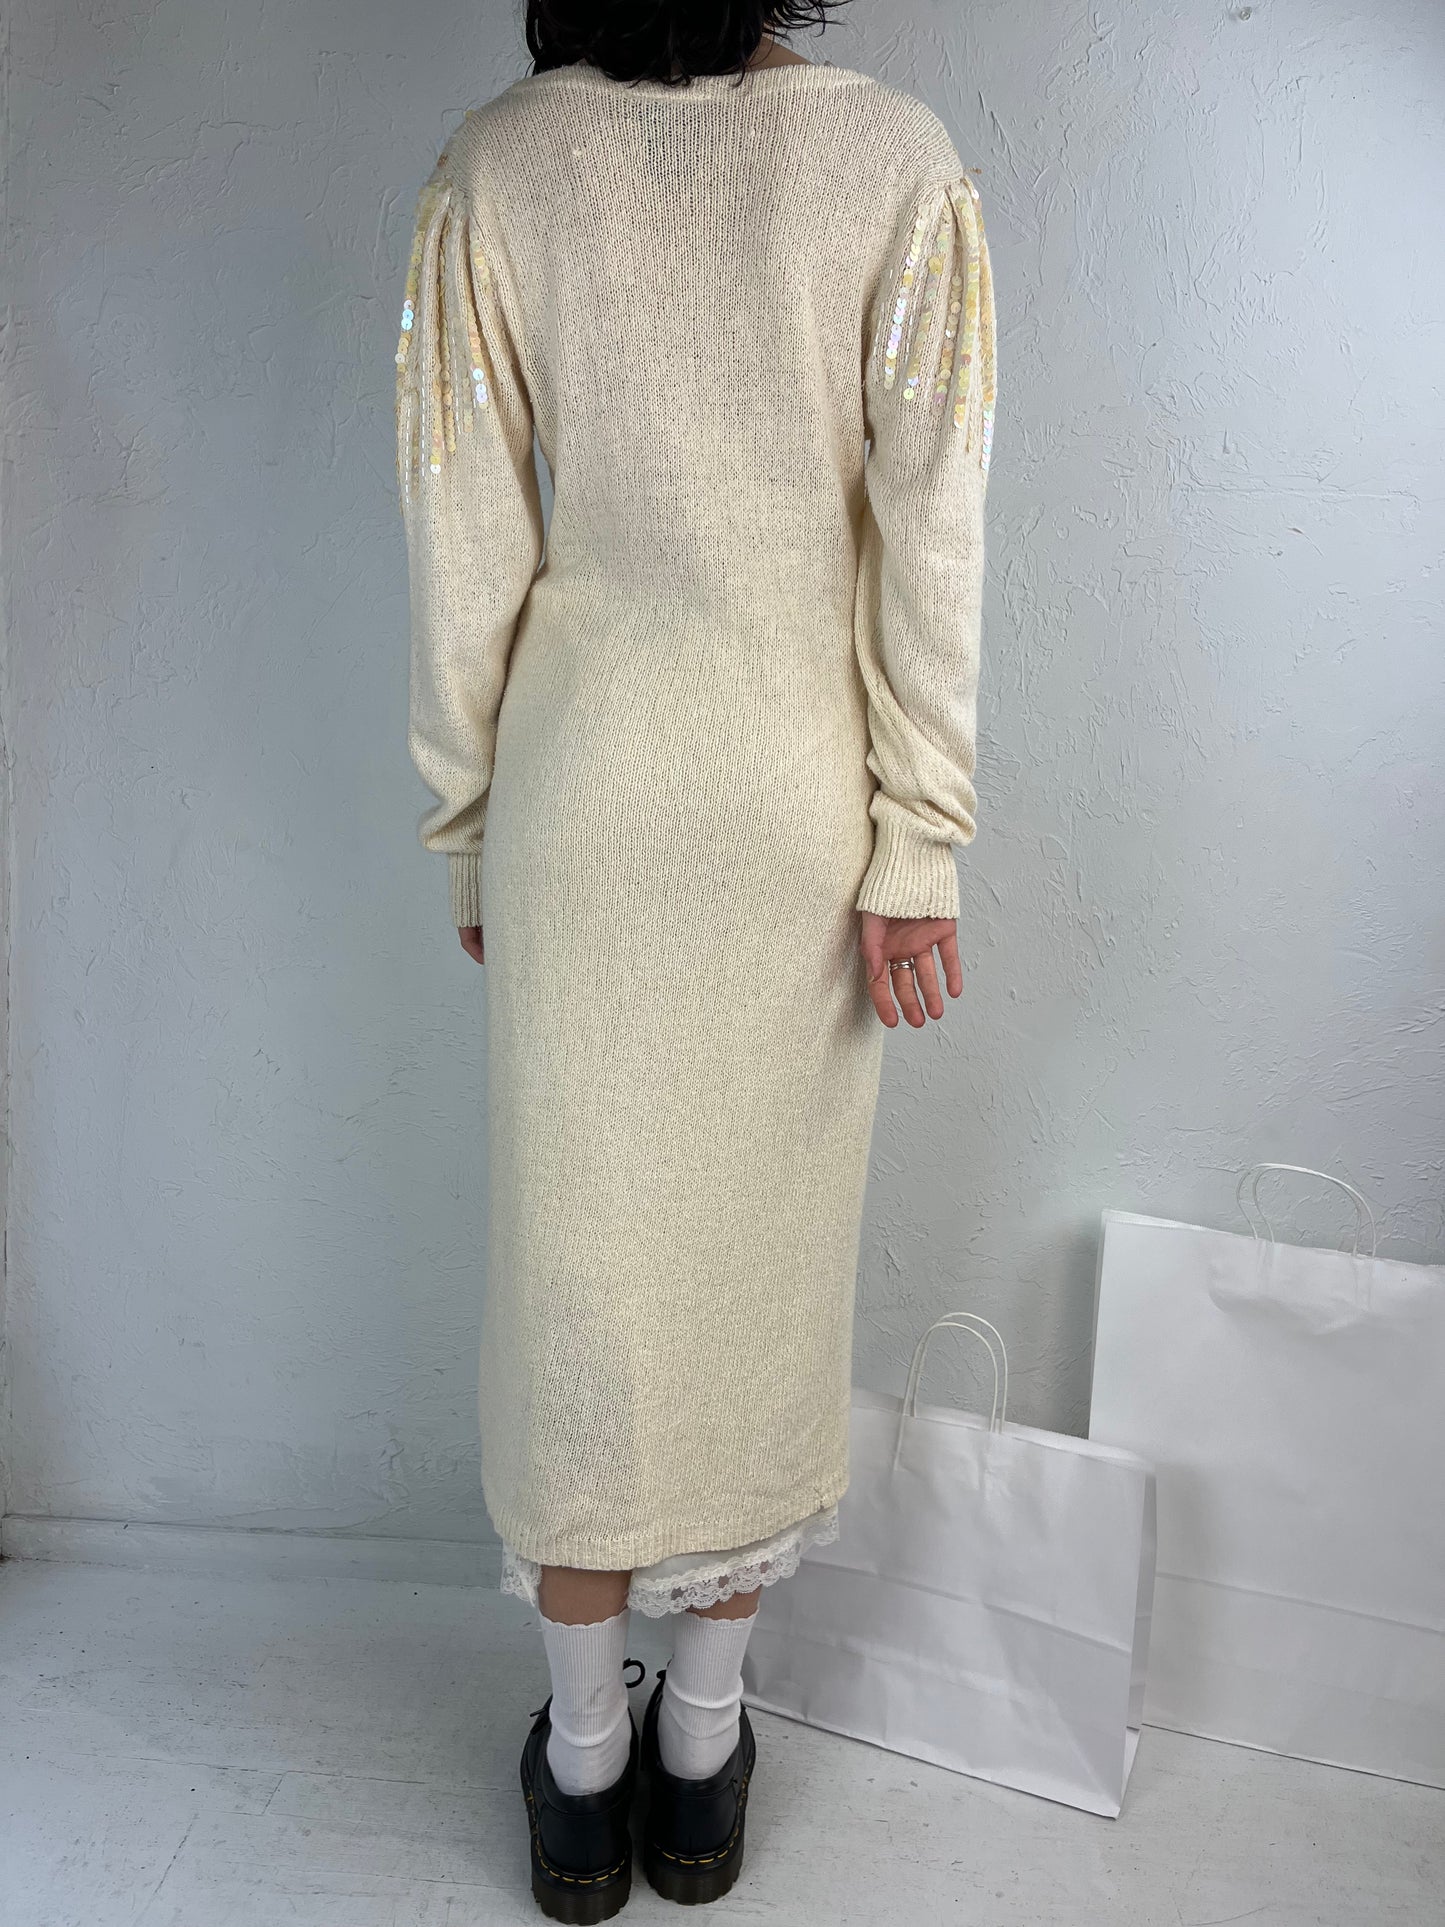 90s 'Raoul' Cream Knit Sequin Long Sleeve Sweater Dress / Small